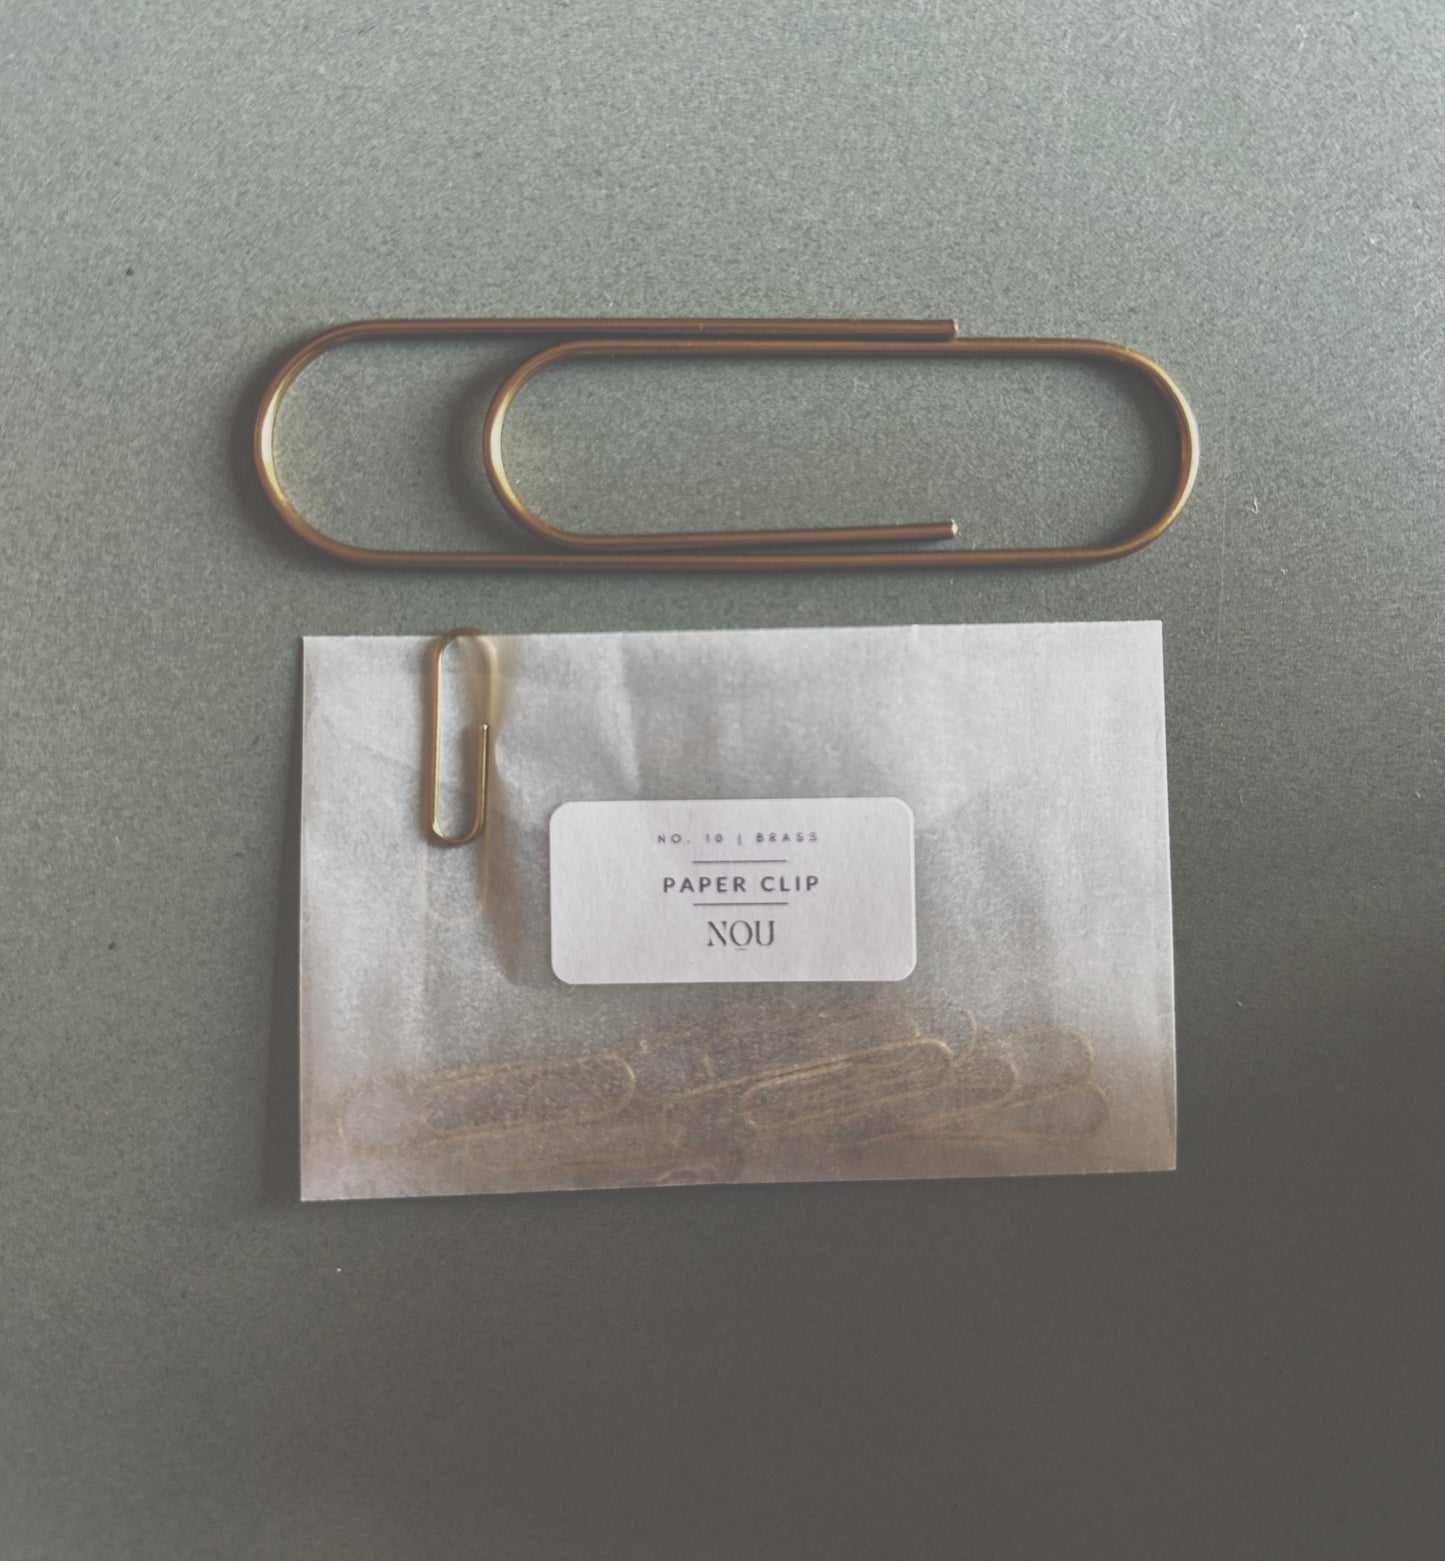 SOLID BRASS PAPERCLIPS